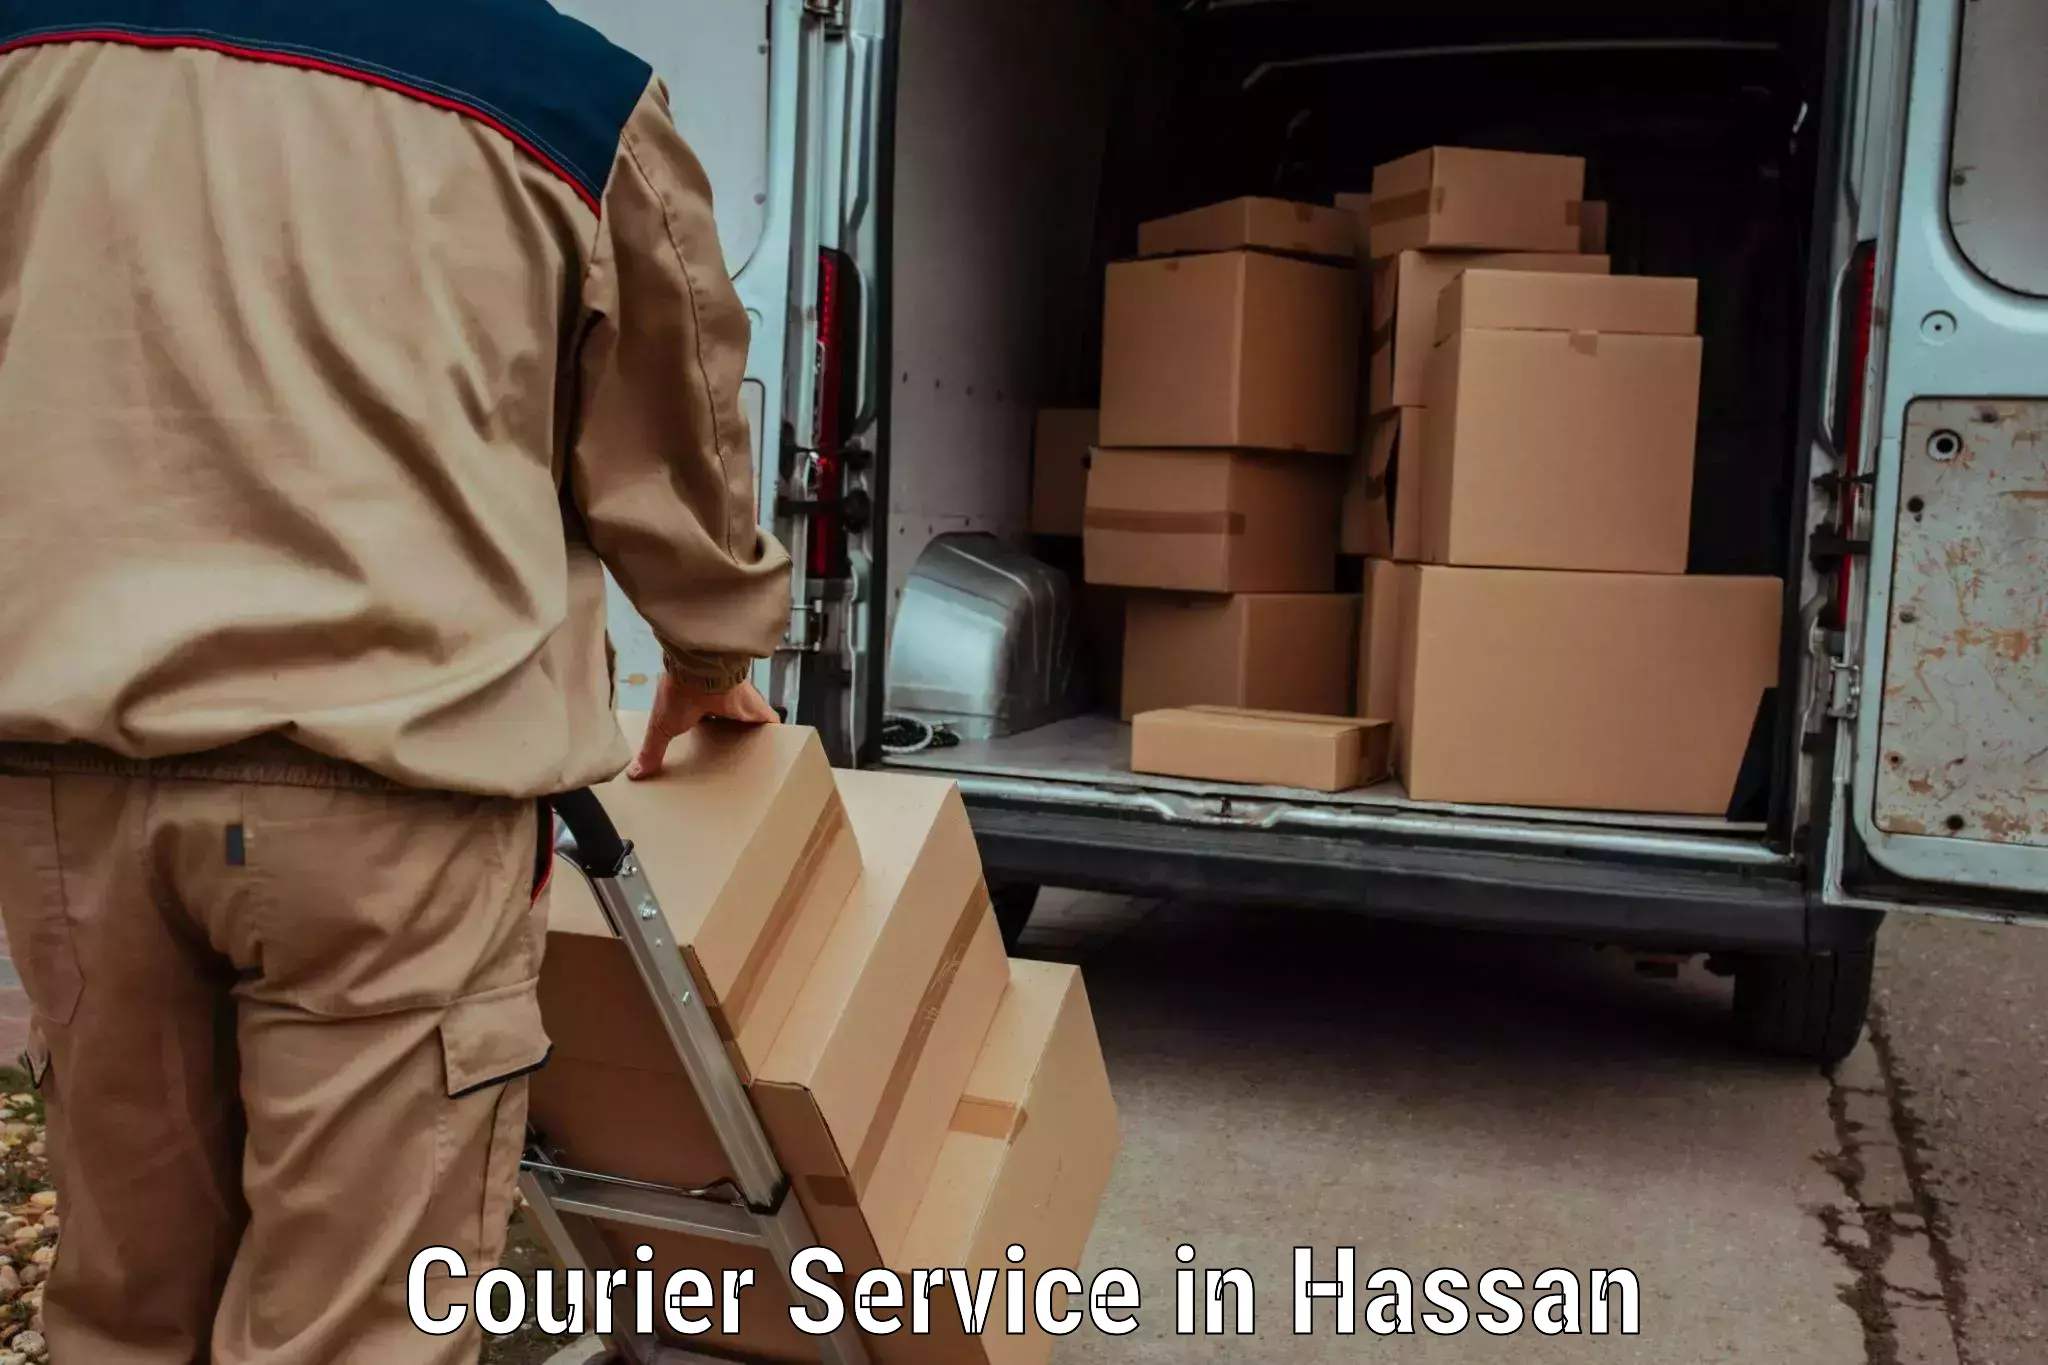 Express package delivery in Hassan